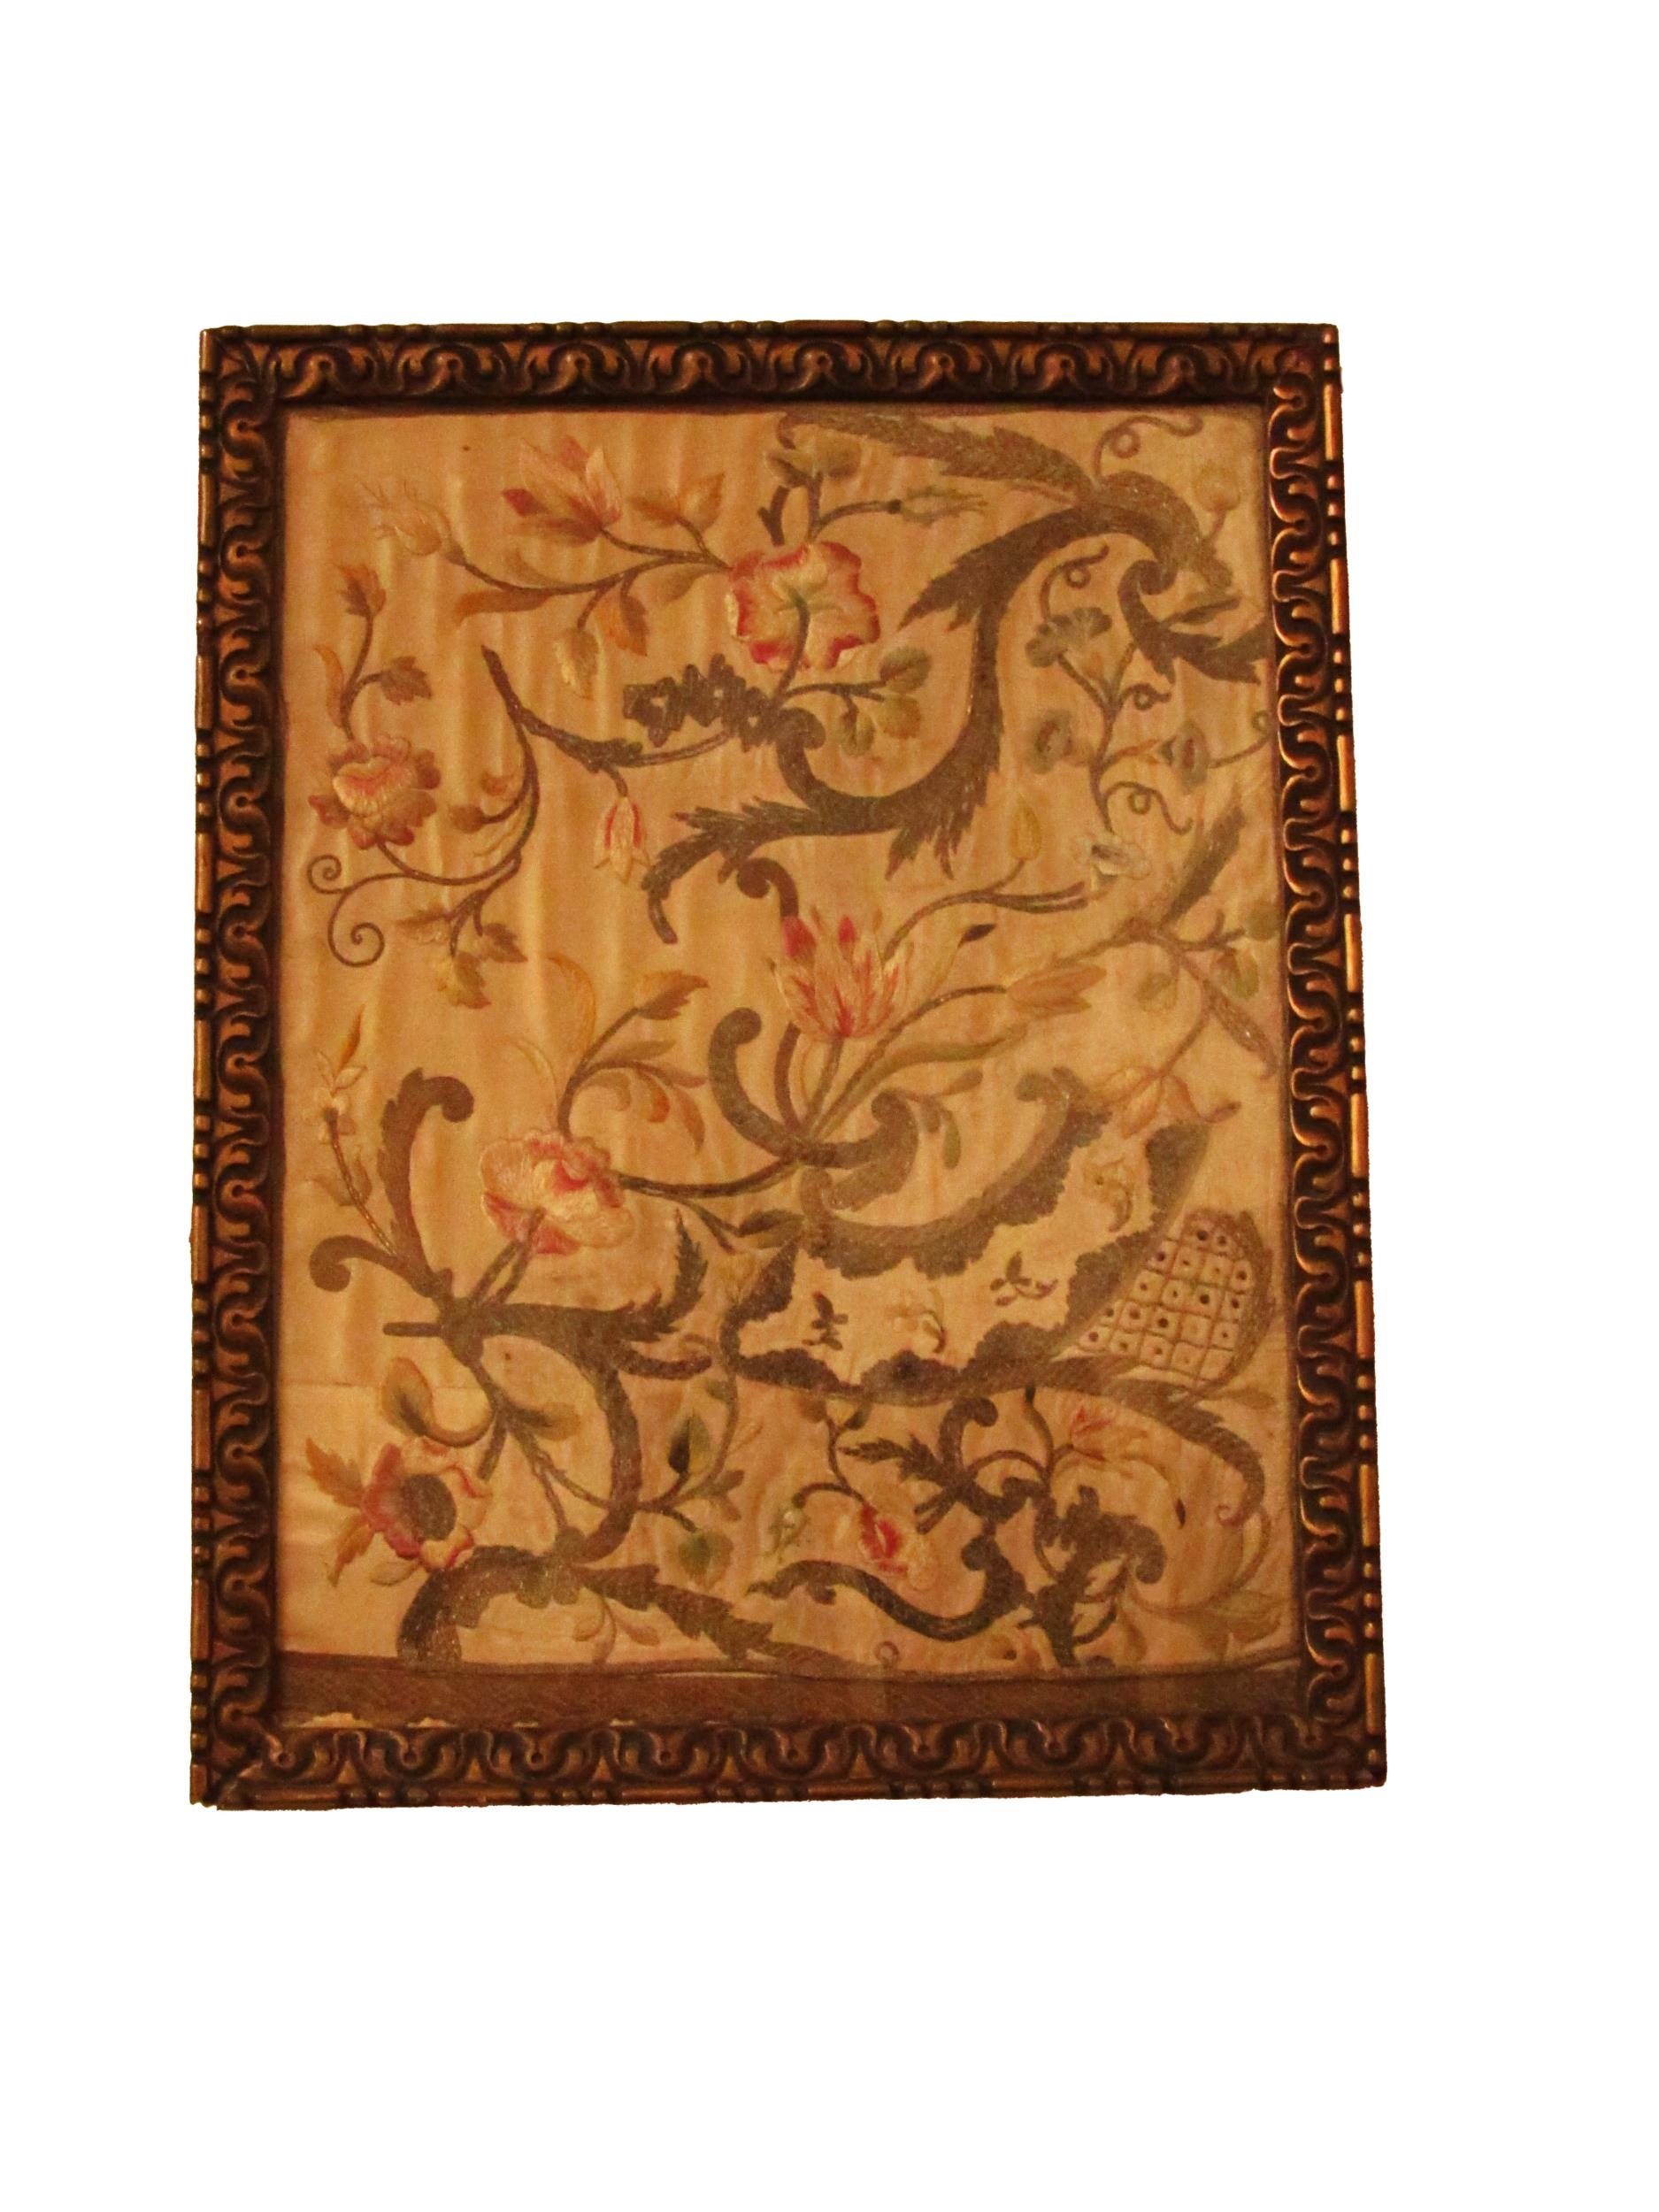 An 18th Century framed embroidered Fabric, depicting interwoven floral design, approx. 46cms x 35cms - Image 2 of 3